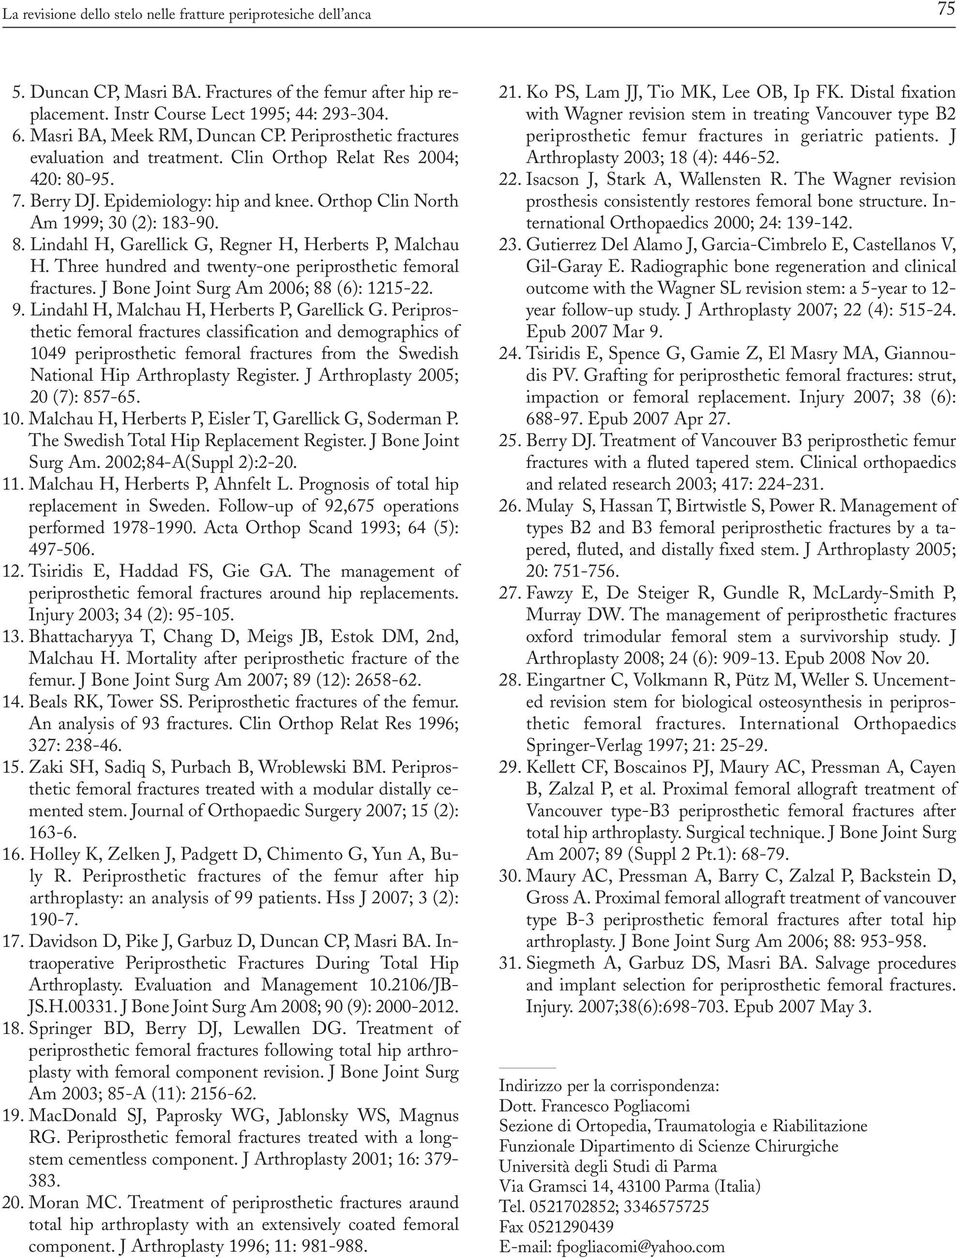 Orthop Clin North Am 1999; 30 (2): 183-90. 8. Lindahl H, Garellick G, Regner H, Herberts P, Malchau H. Three hundred and twenty-one periprosthetic femoral fractures.